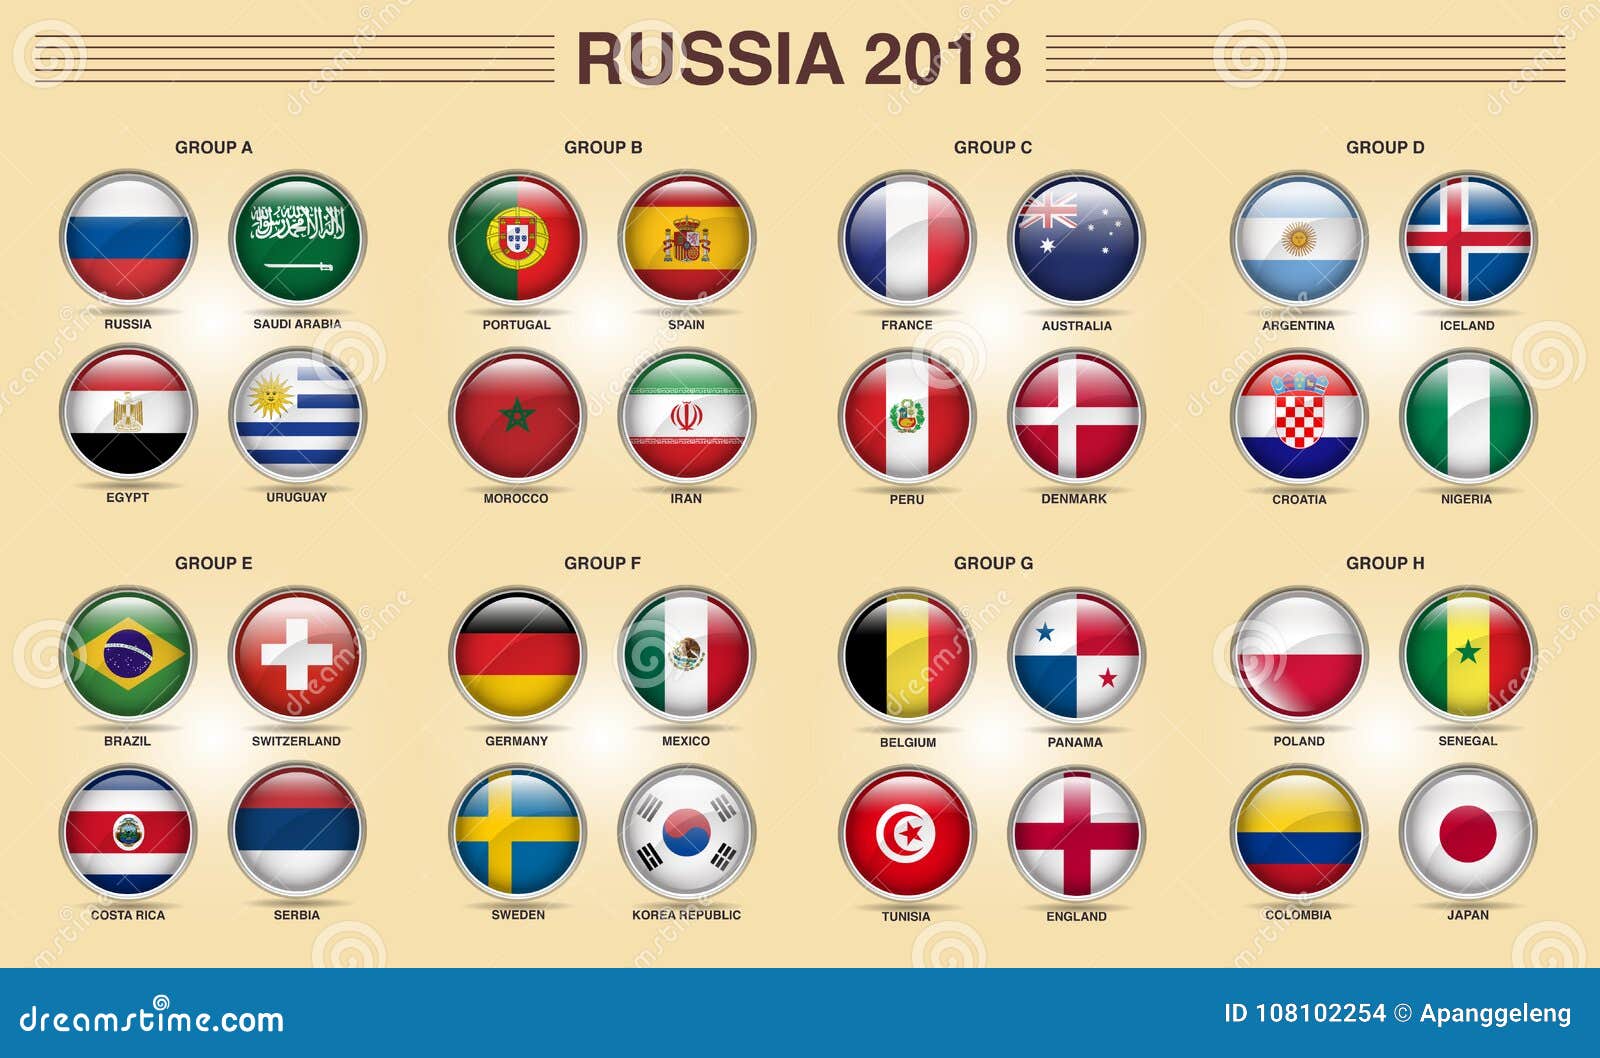 Fifa world cup russia 2018 group a fixture Vector Image